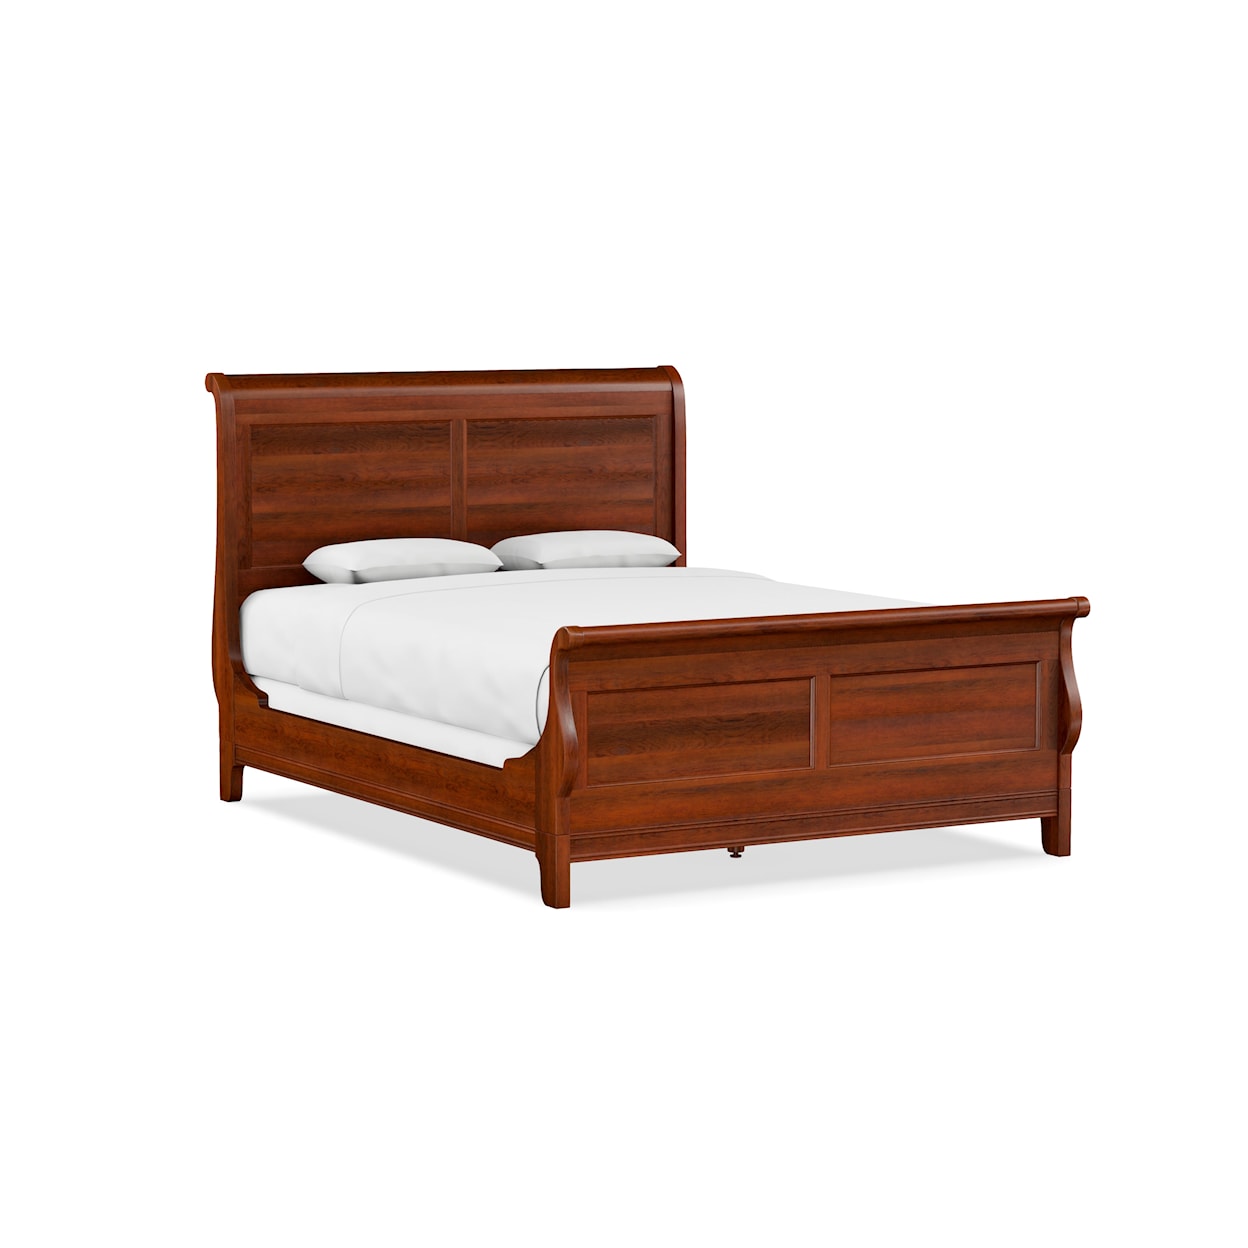 Durham Chateau Fontaine Queen Sleigh Bed